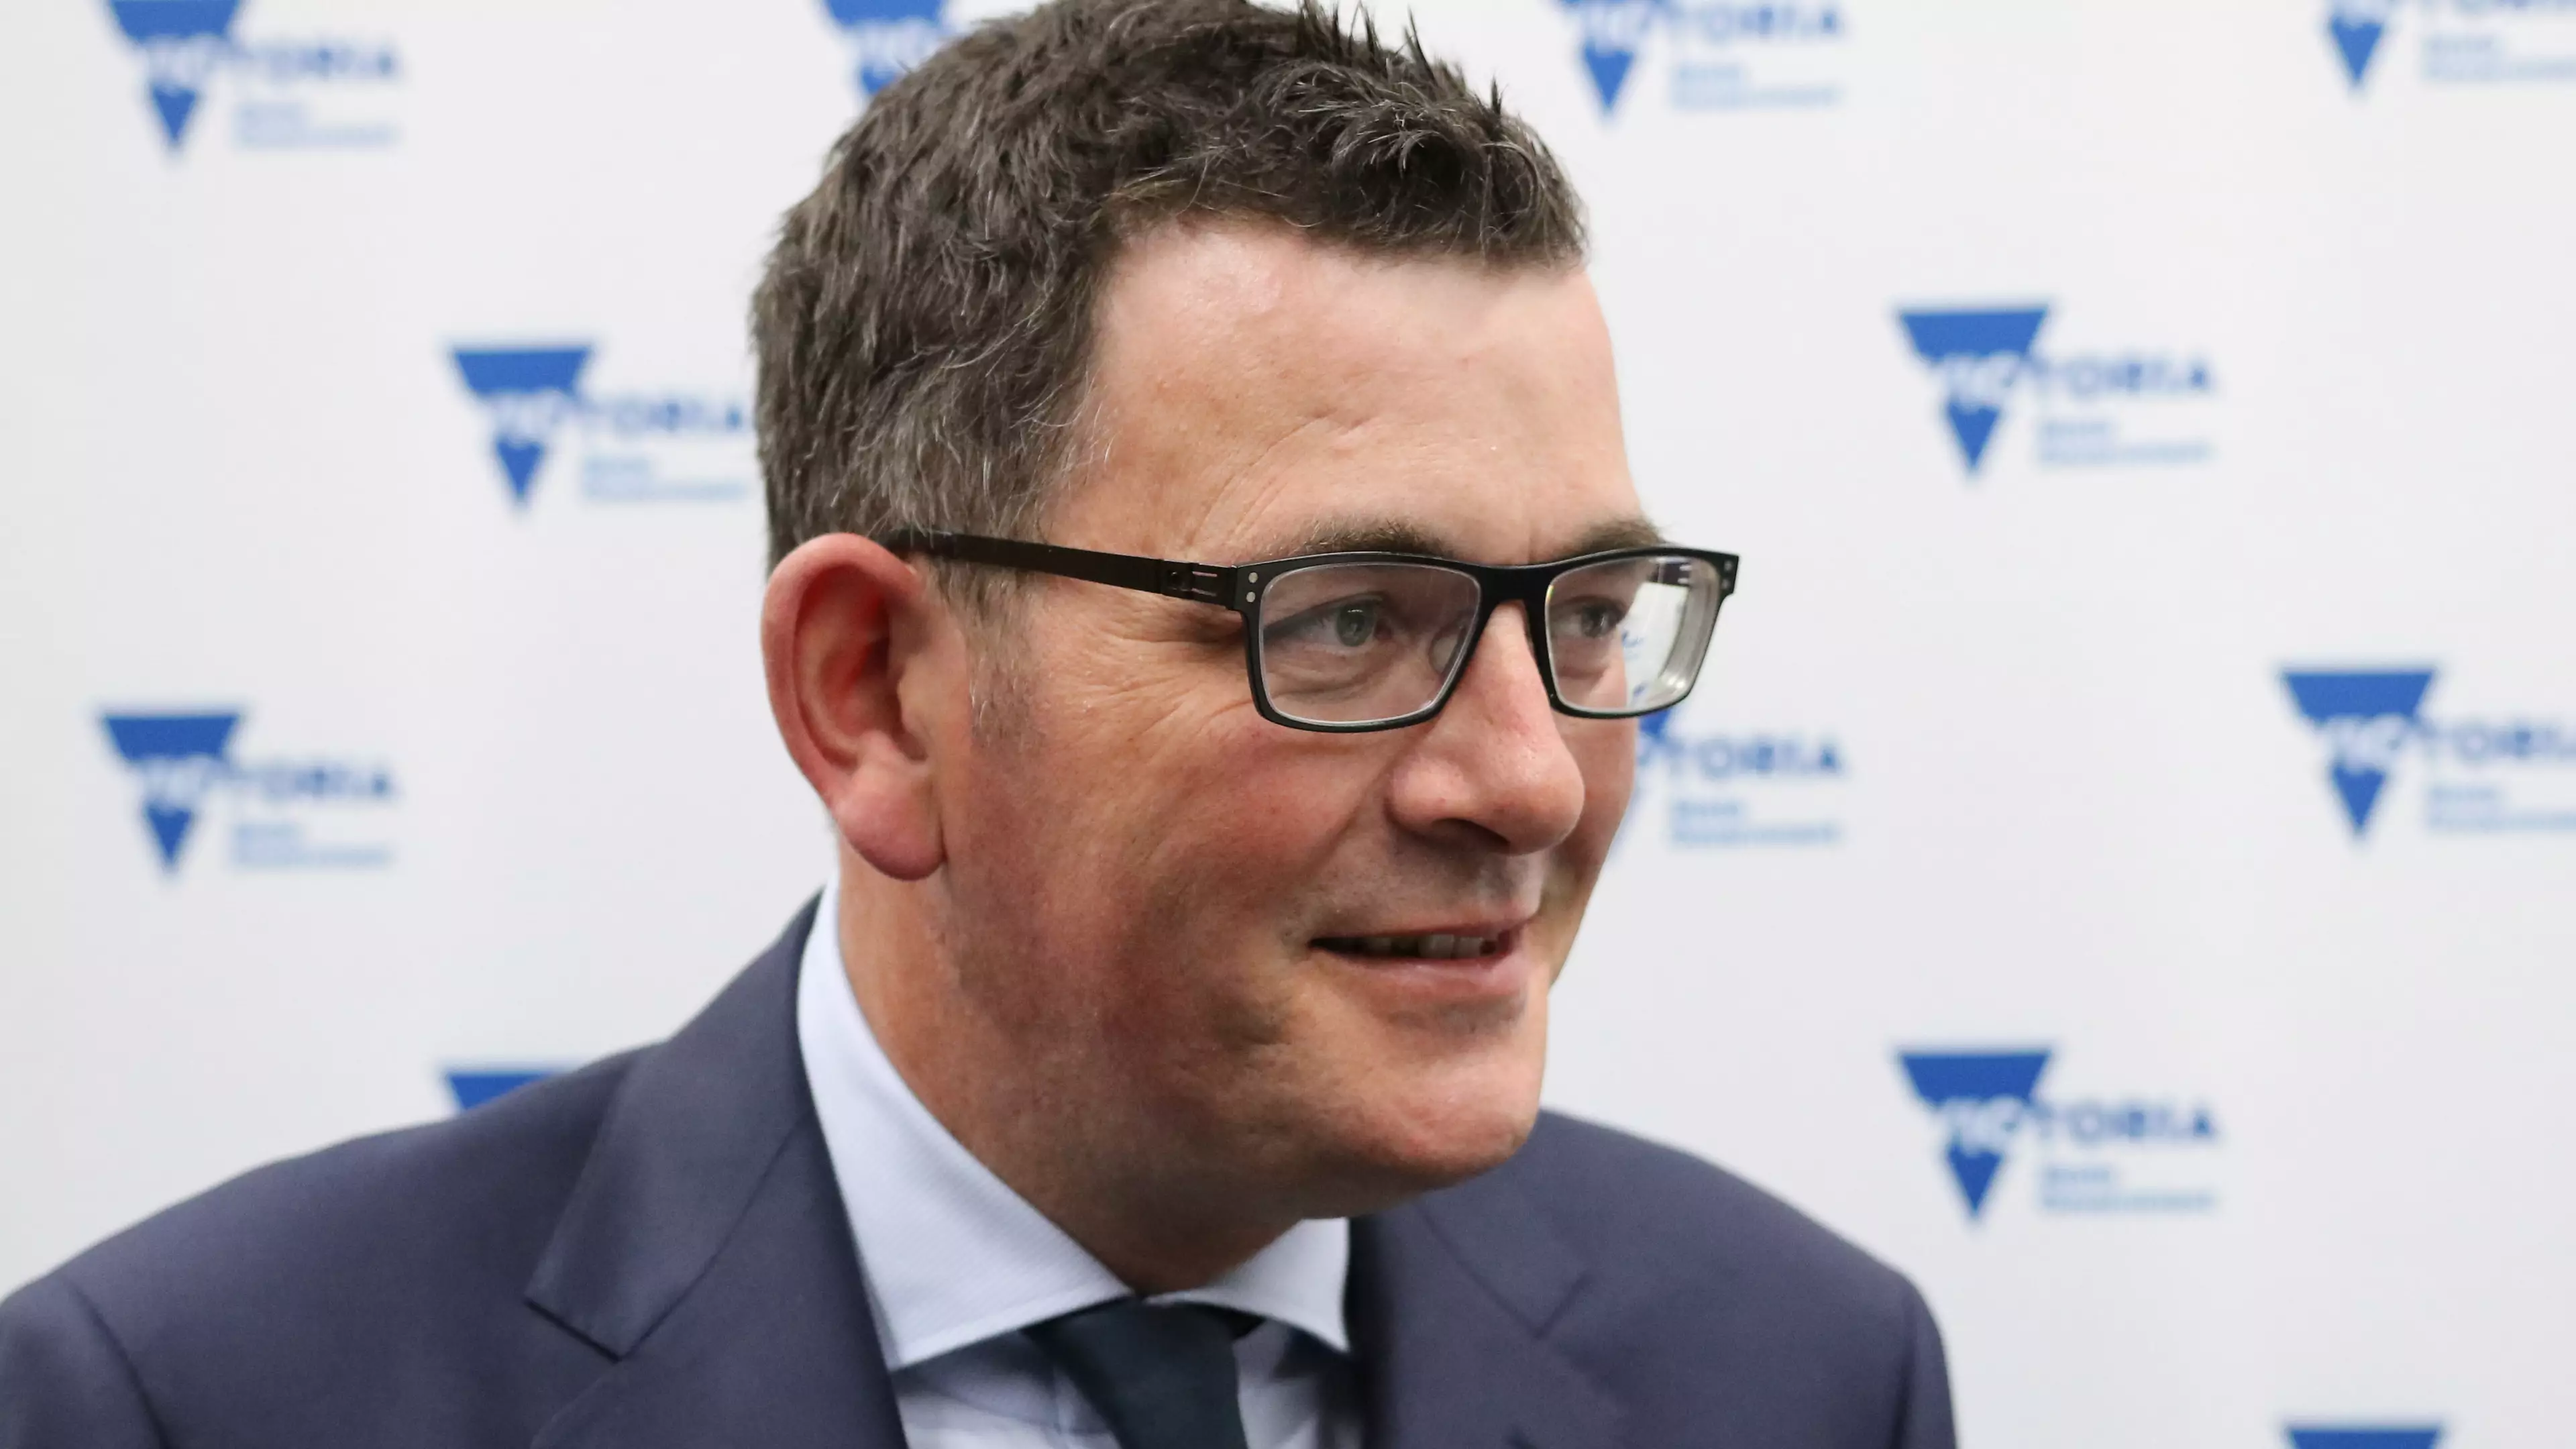 Daniel Andrews Has Been Nominated For Political Leader Of The Year